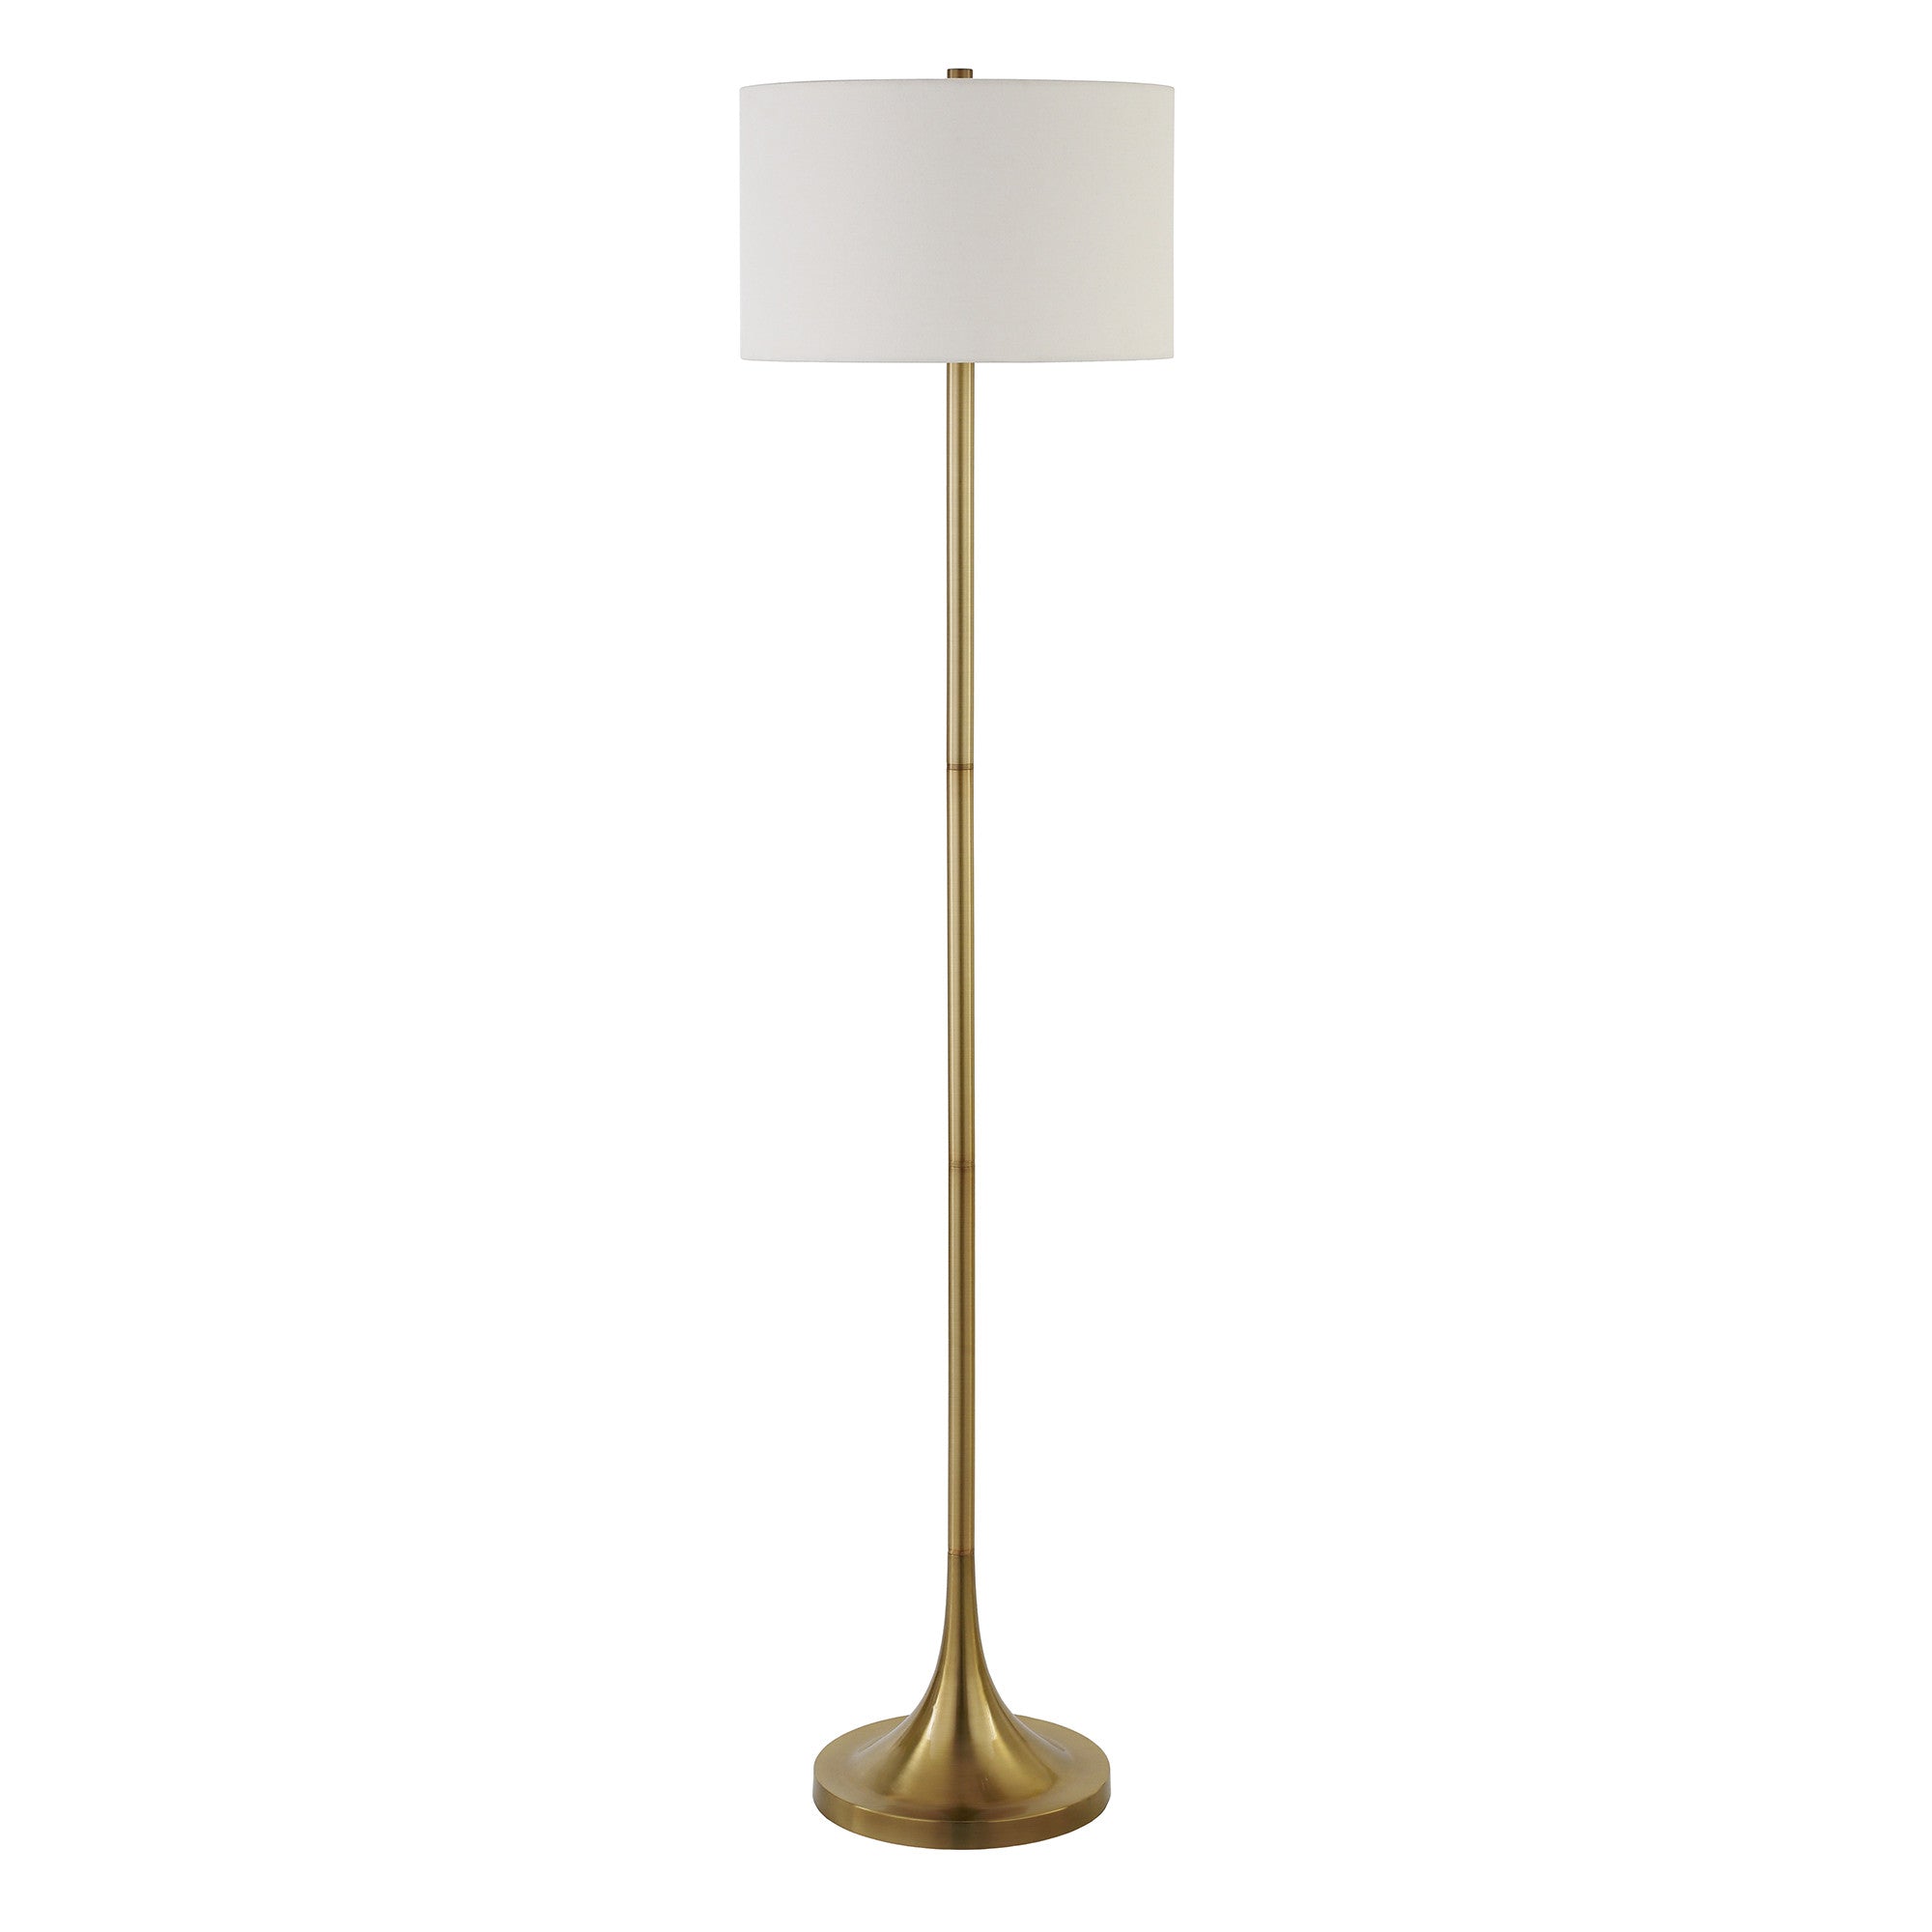 62" Brass Traditional Shaped Floor Lamp With White Frosted Glass Drum Shade